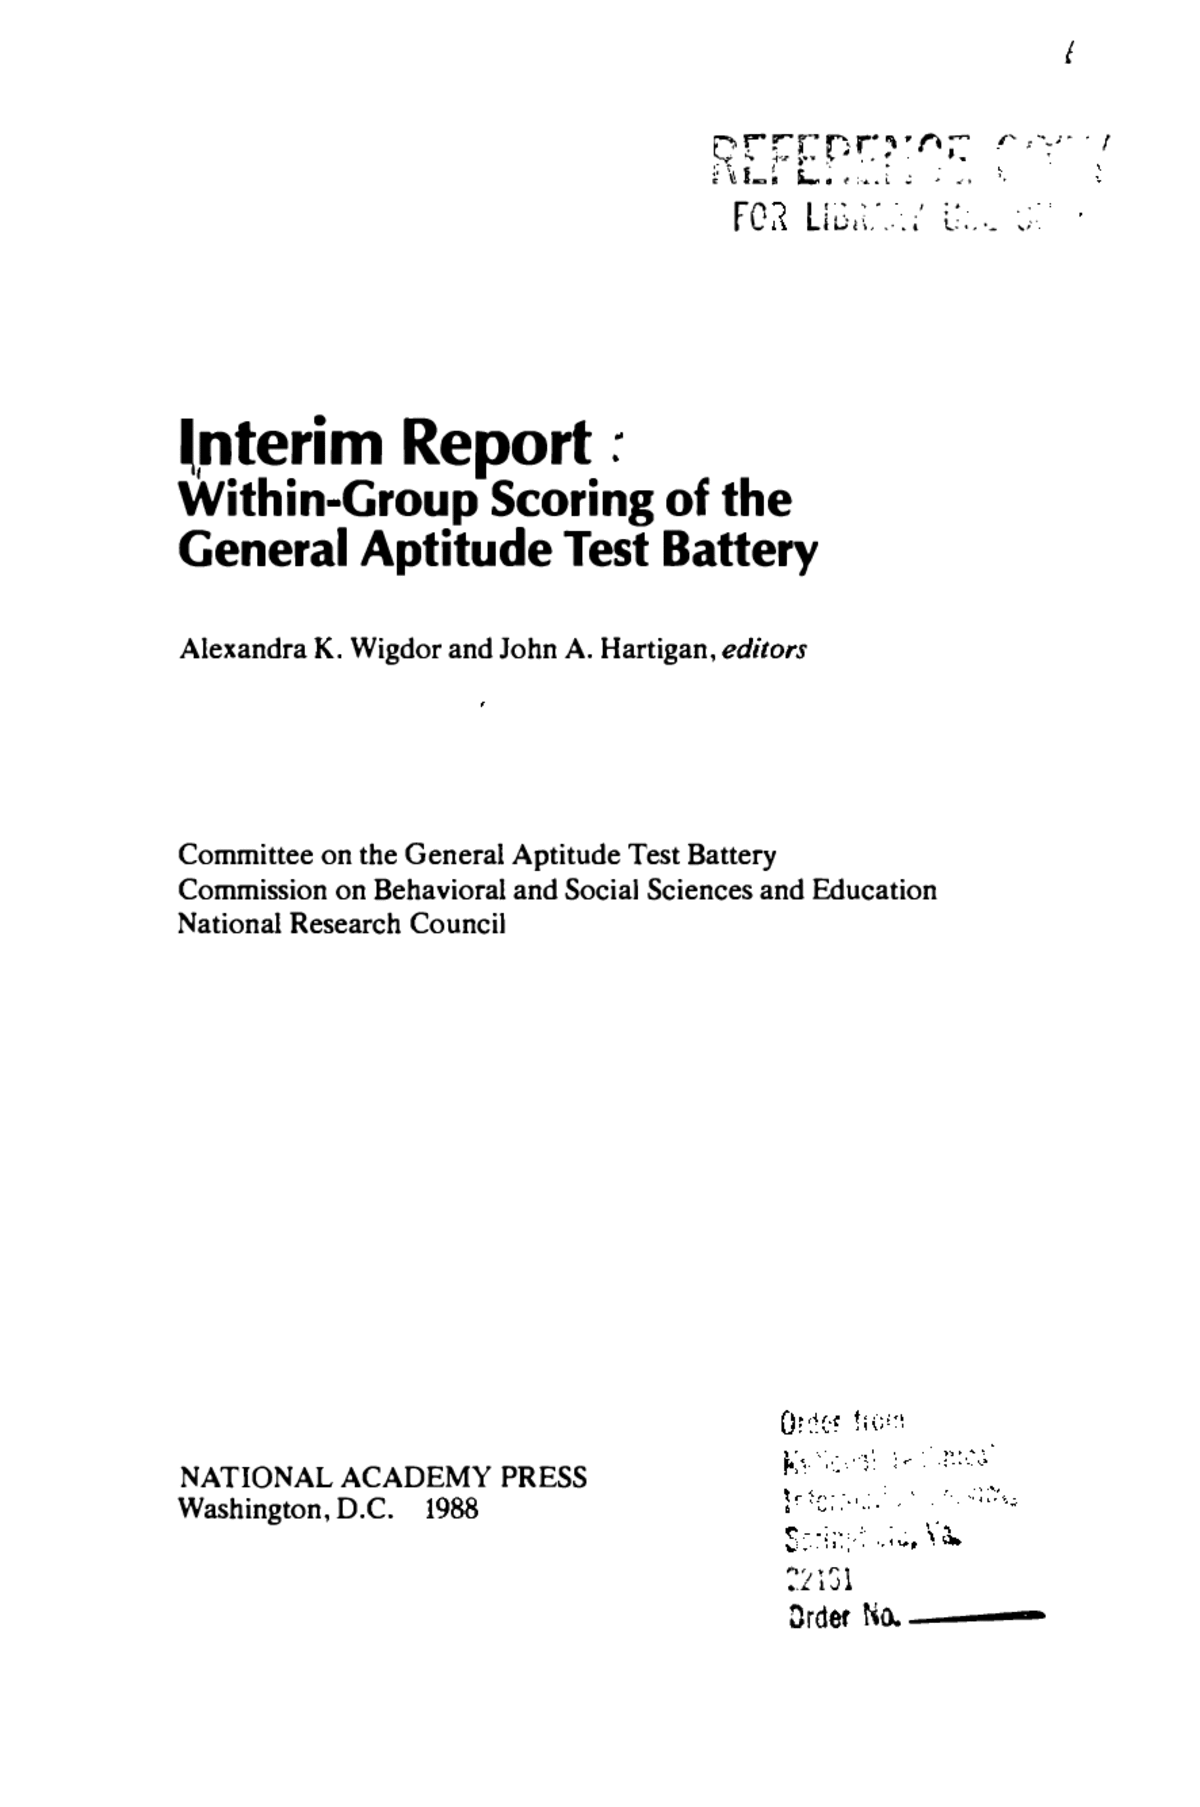 front-matter-interim-report-within-group-scoring-of-the-general-aptitude-test-battery-the